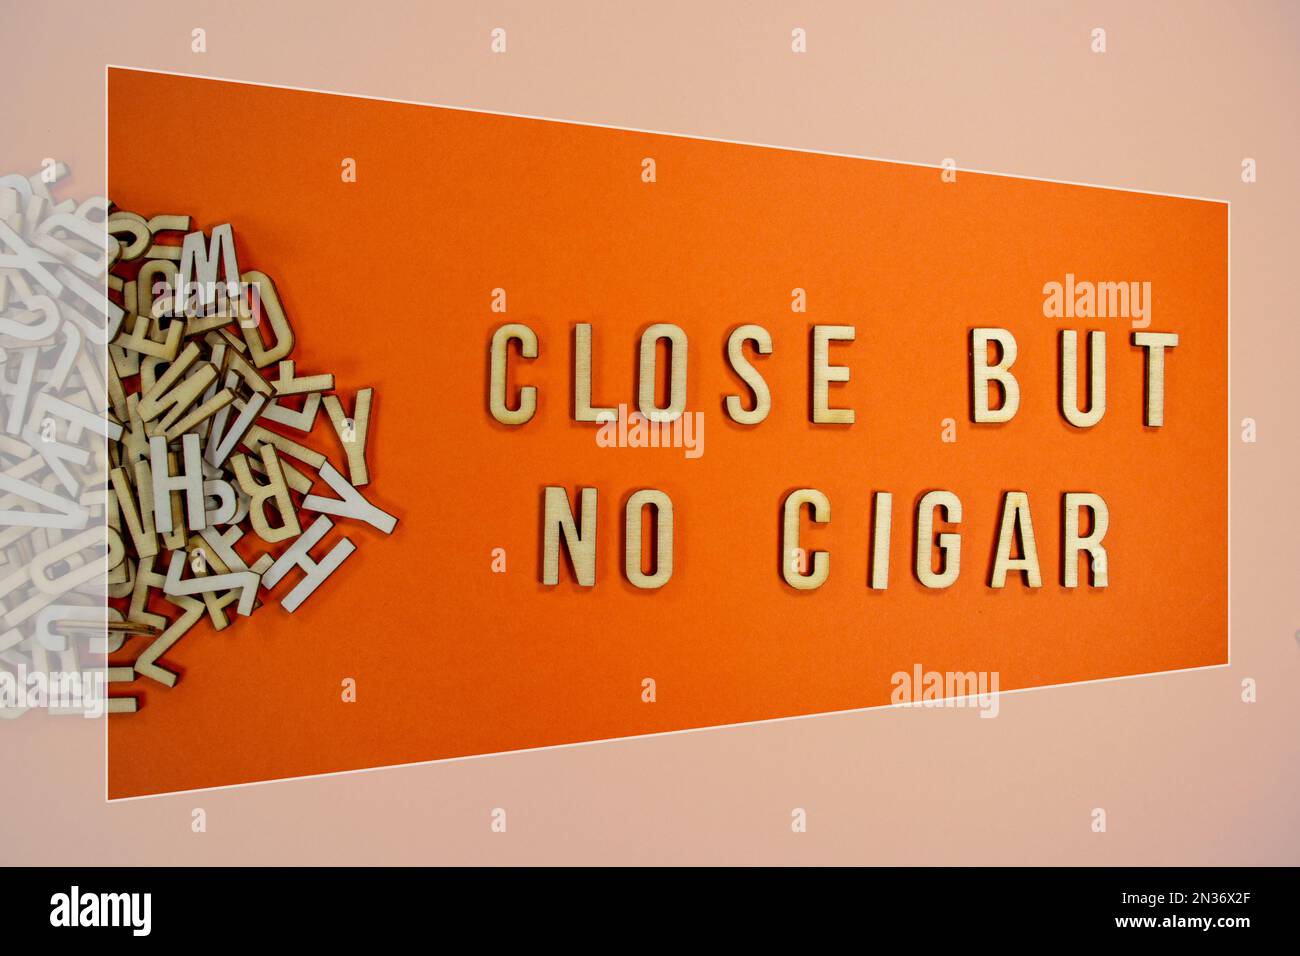 CLOSE BUT NO CIGAR in wooden English language capital letters spilling from a pile of letters on a orange background framed Stock Photo